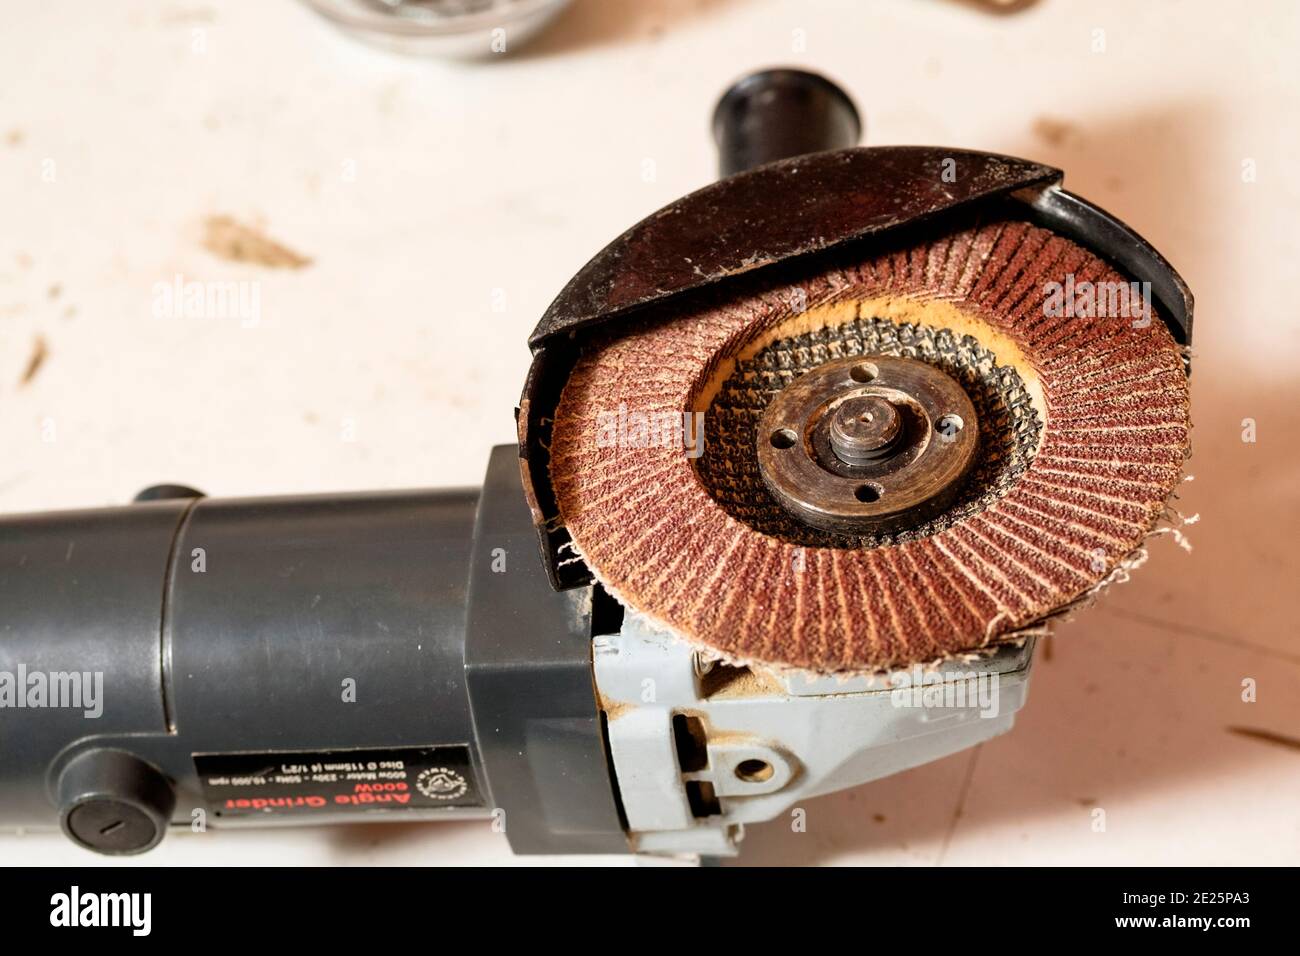 A flapy sanding disk mounted on a handheld angle ginder. Stock Photo